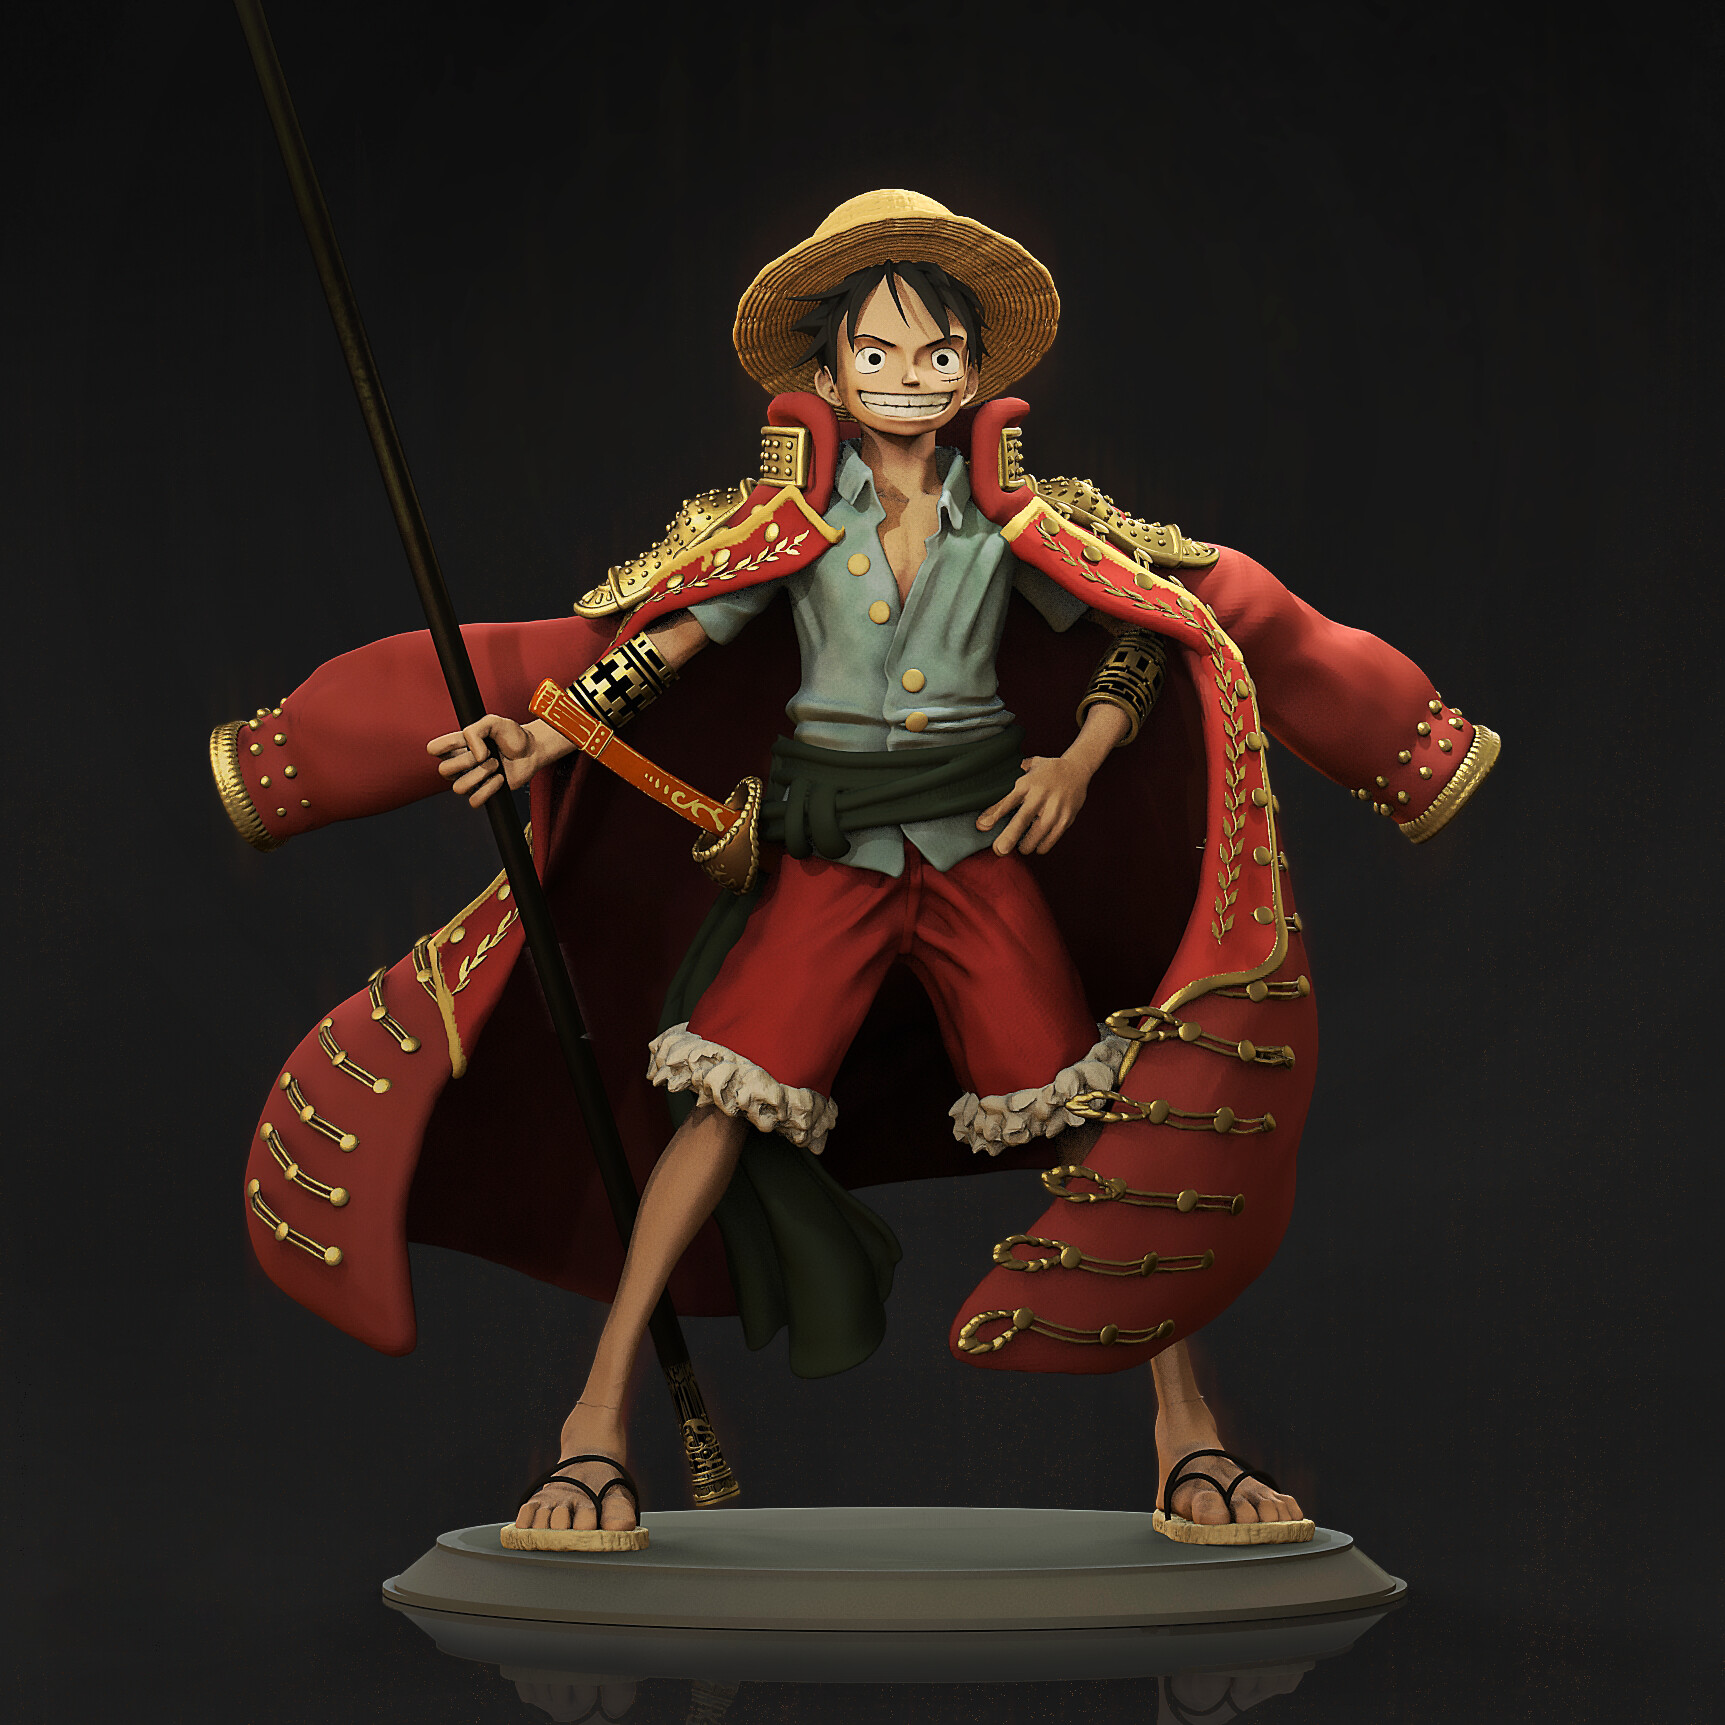 Luffy's Dream: The Road To Becoming Pirate King » Arthatravel.com